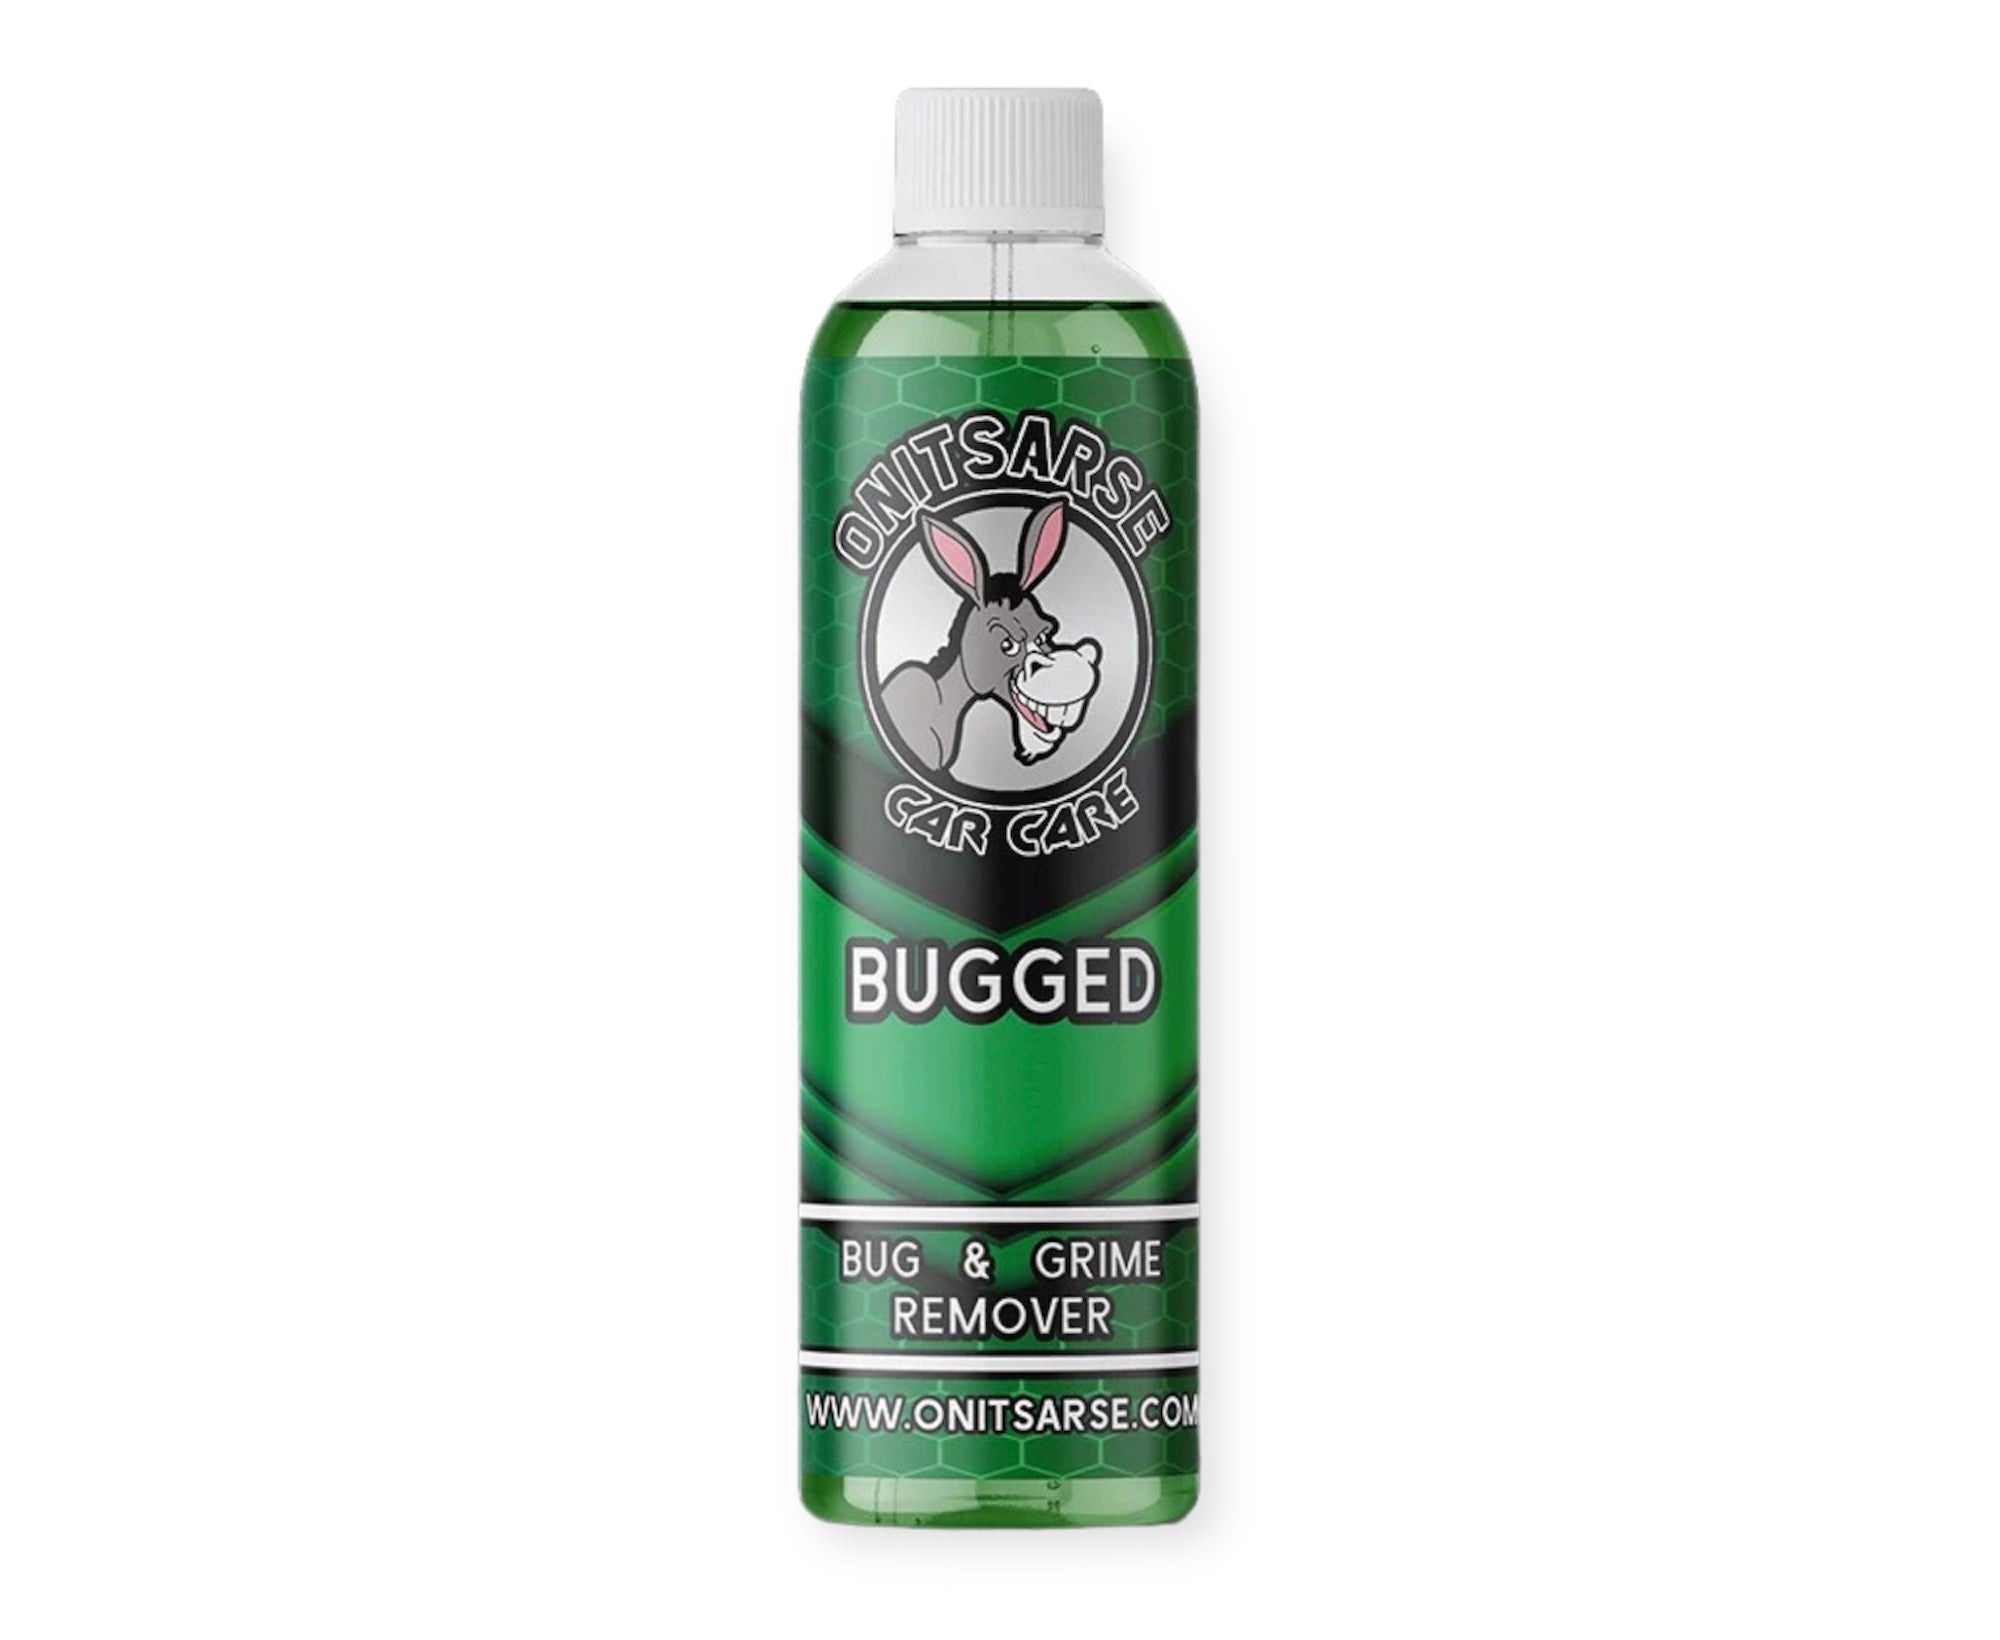 Bugged (Bug & Grime Remover)